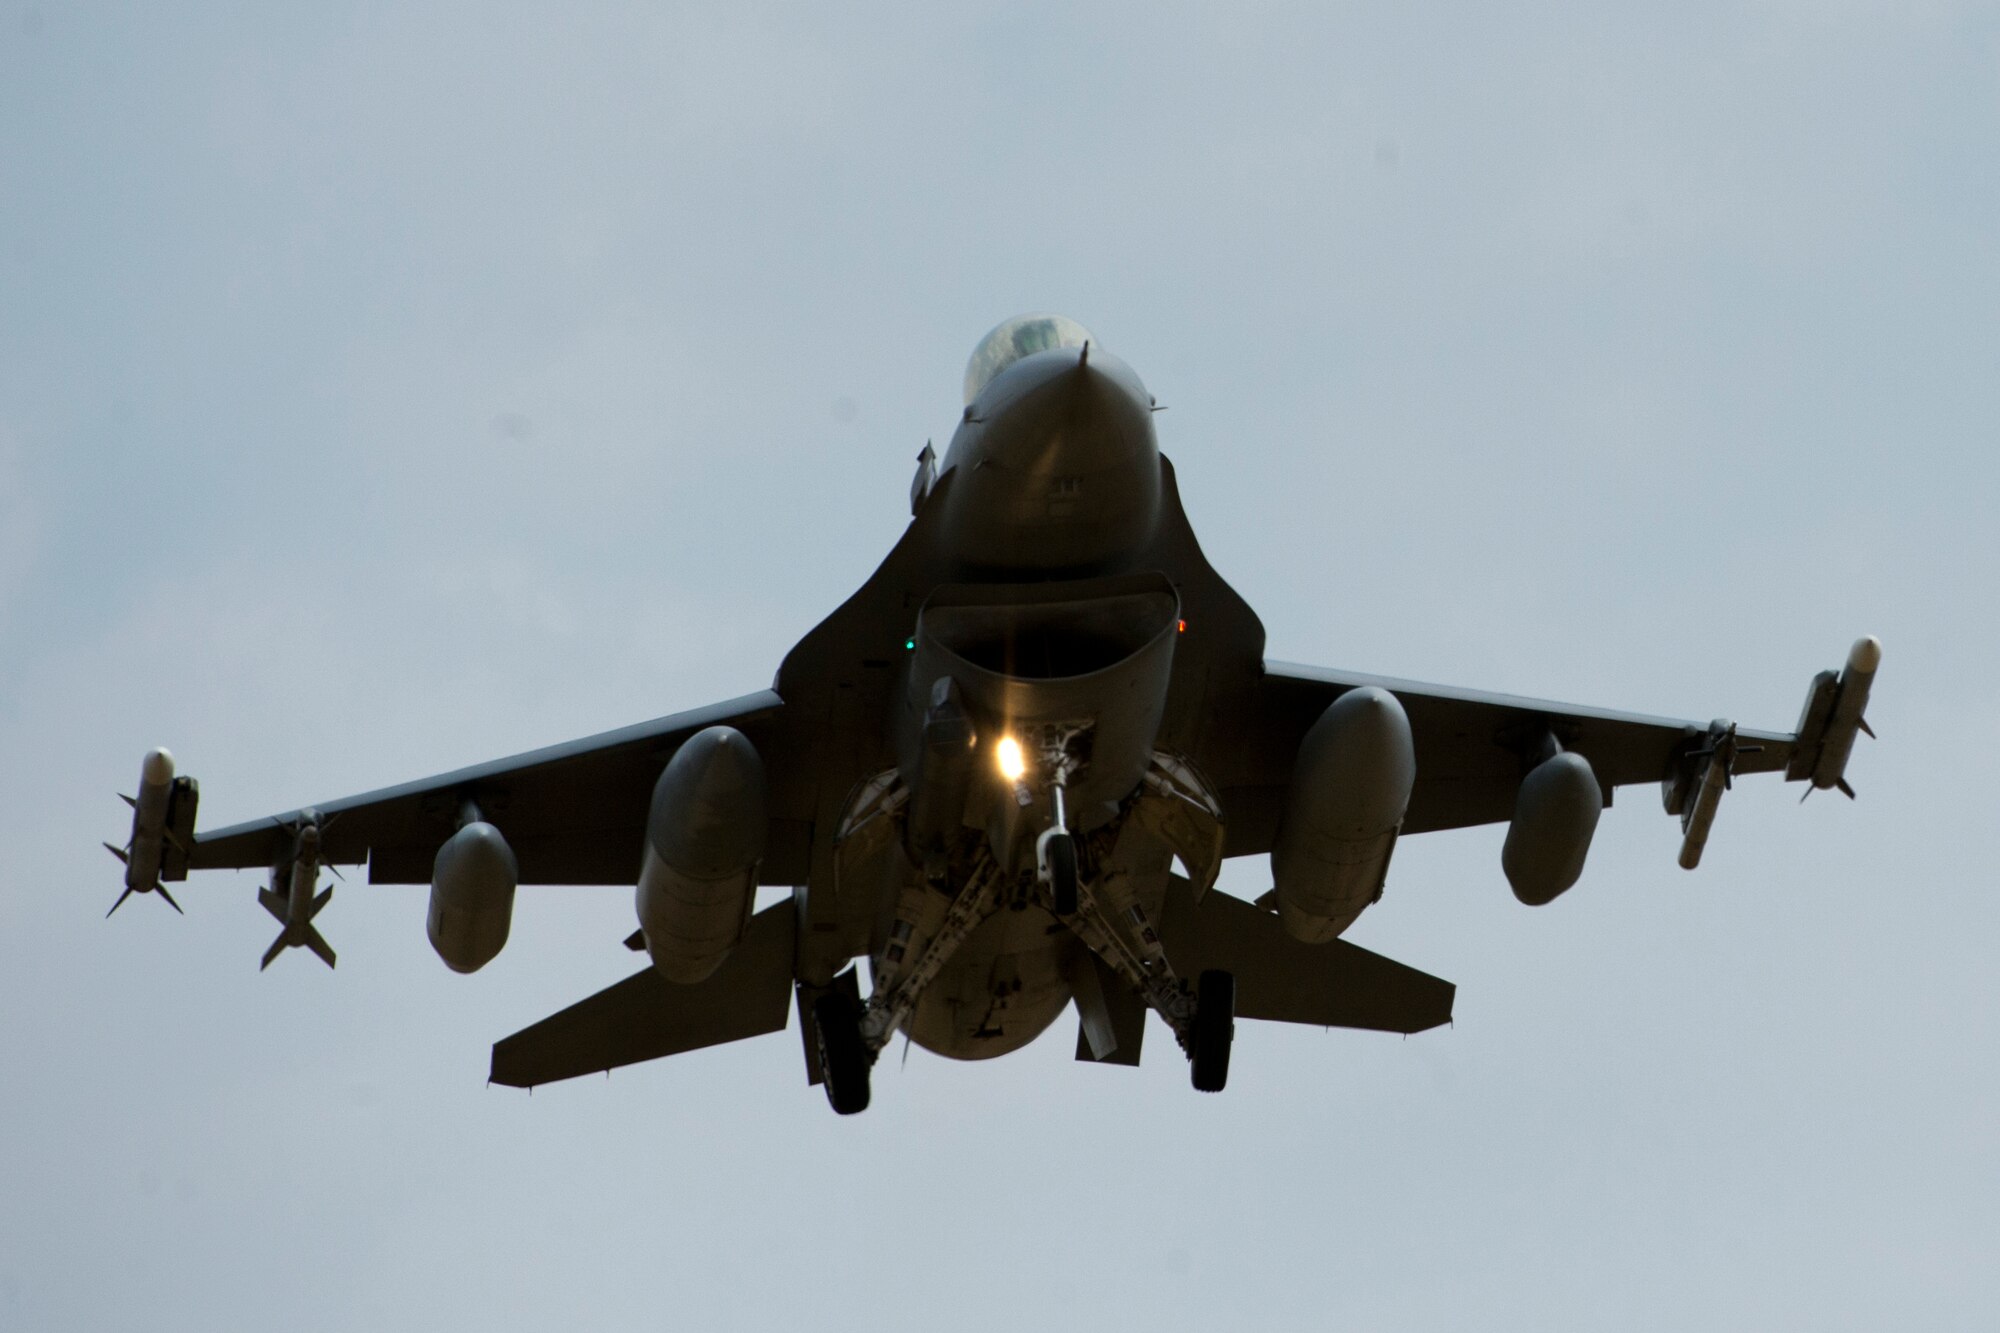 An F-16C Fighting Falcon from the 31st Fighter Wing, 510th Fighter Squadron, Aviano Air Base, Italy, prepares to land at Royal Air Force Lakenheath, England, July 20, 2018. The 510th FS is participating in a bilateral training event focused on maintaining joint readiness while building interoperability capabilities with NATO and other U.S. Air Force assets. (U.S. Air Force photo by Master Sgt. Eric Burks)